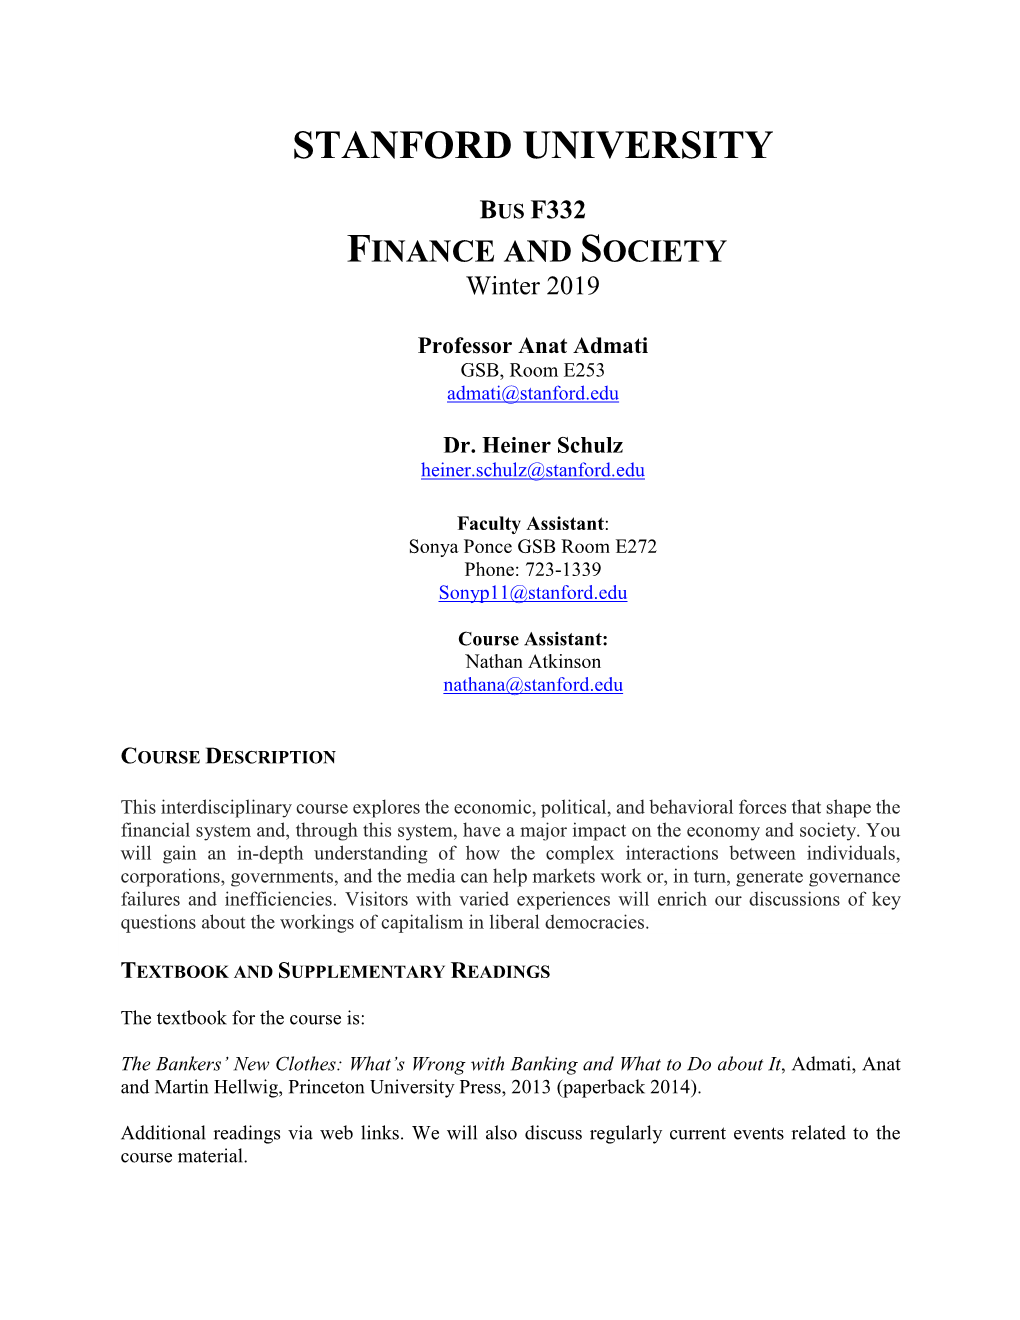 Stanford University Bus F332 Finance and Society